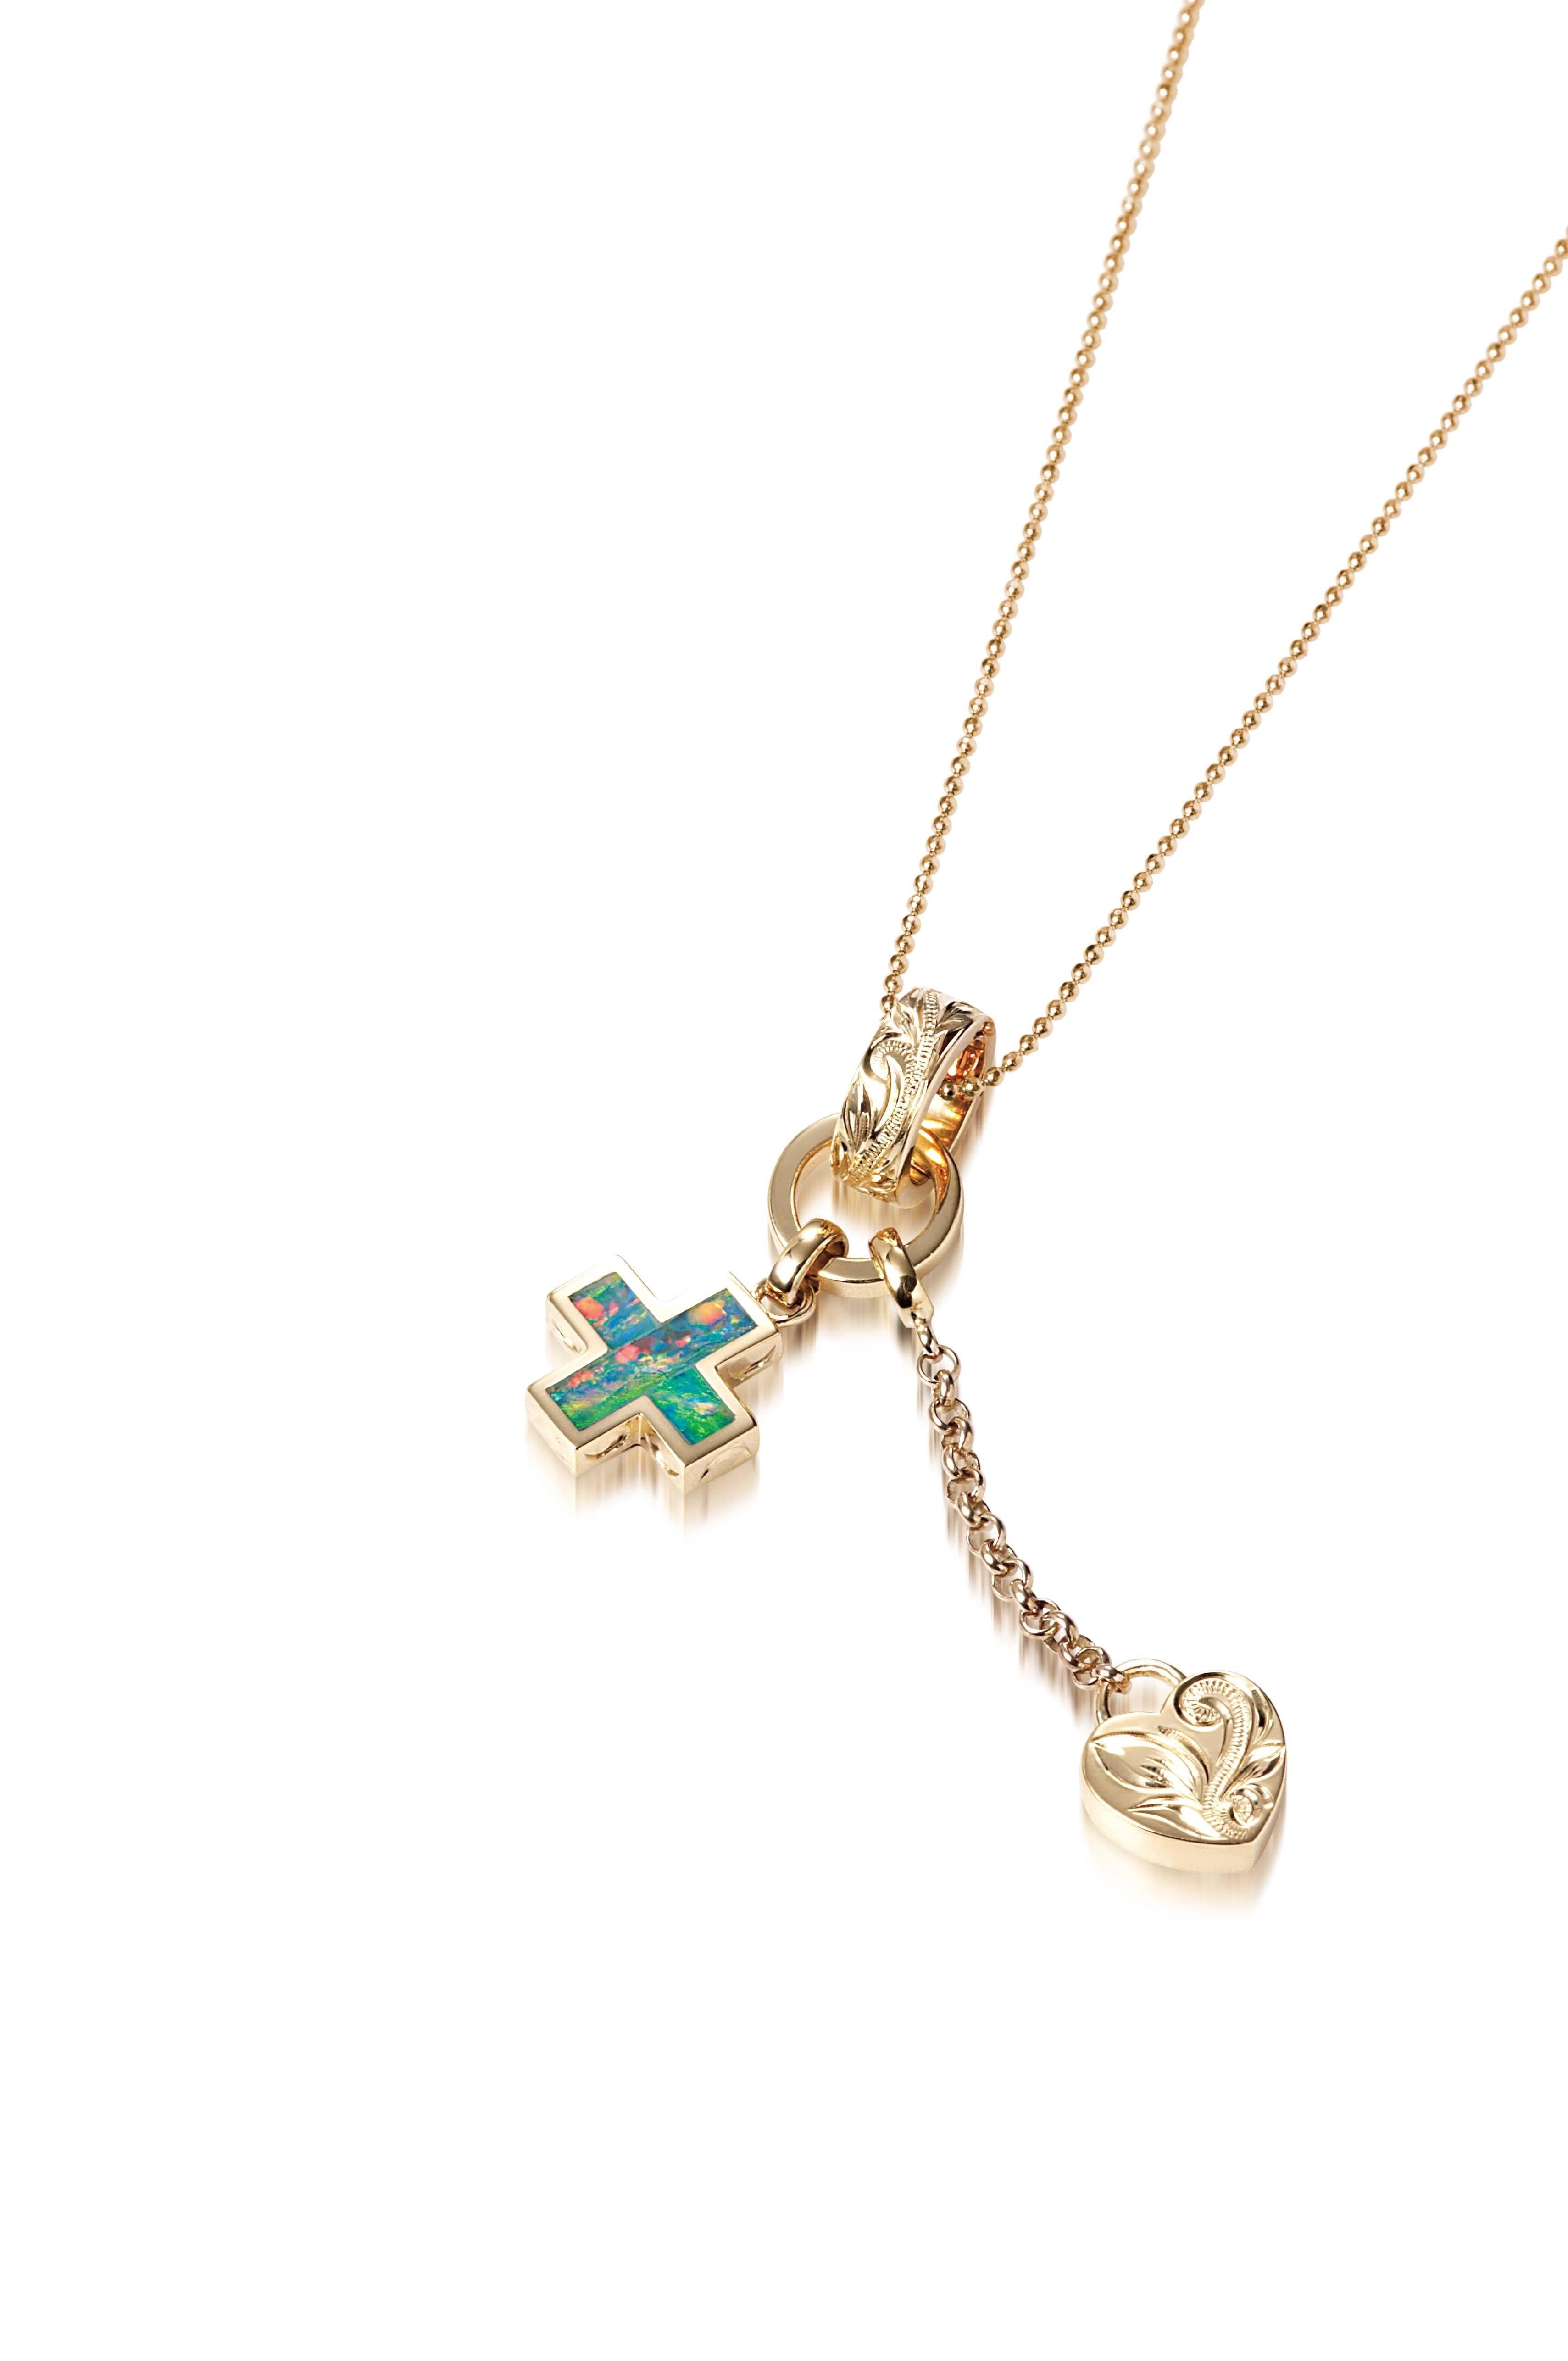 The picture shows a 14K yellow gold opal cross and heart charm pendant with hand engravings.